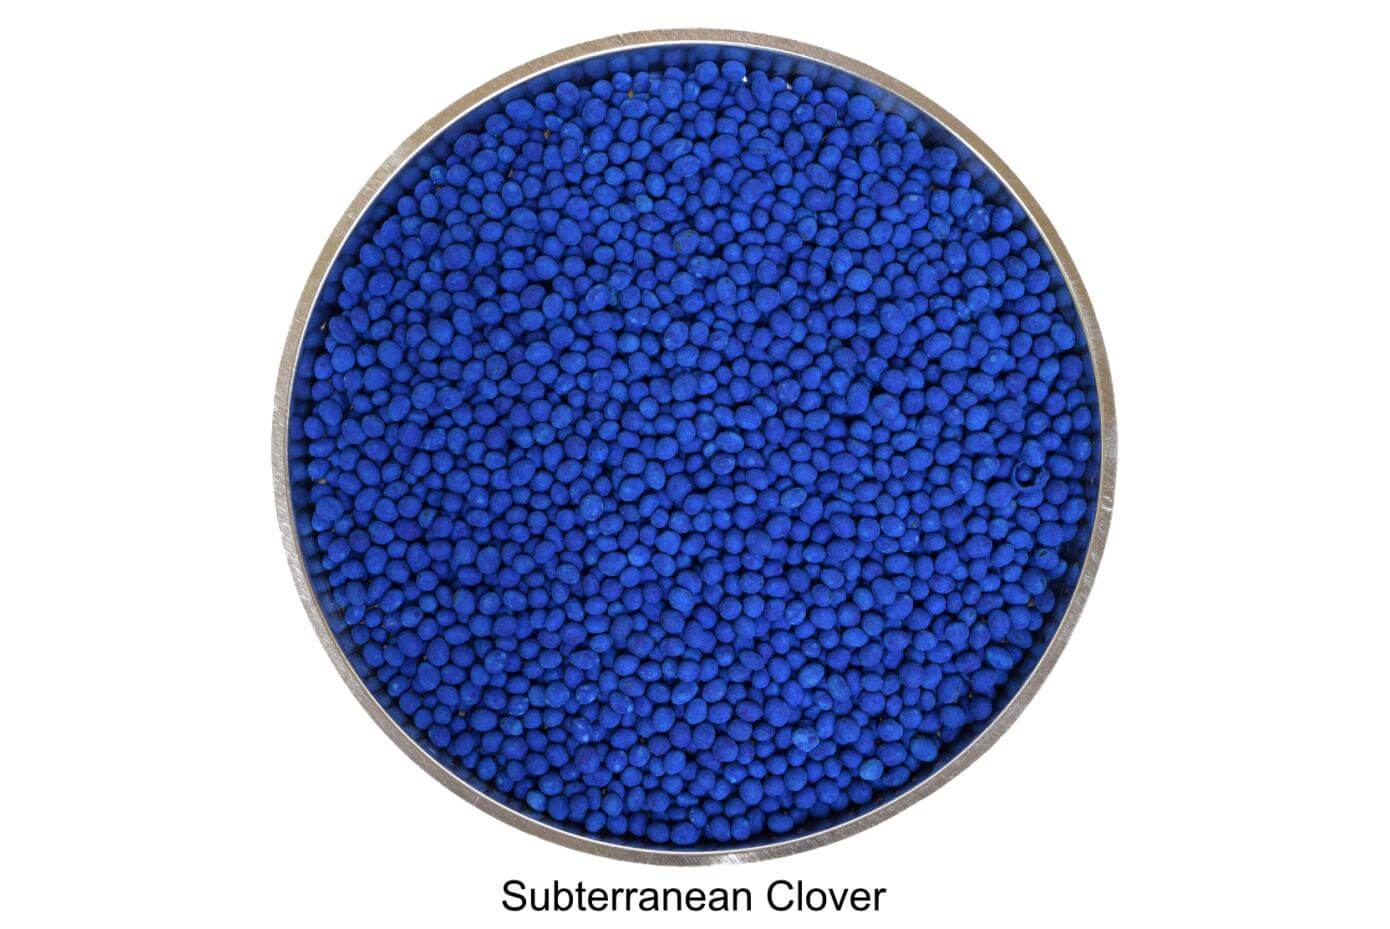 Coated Subterranean clover seeds